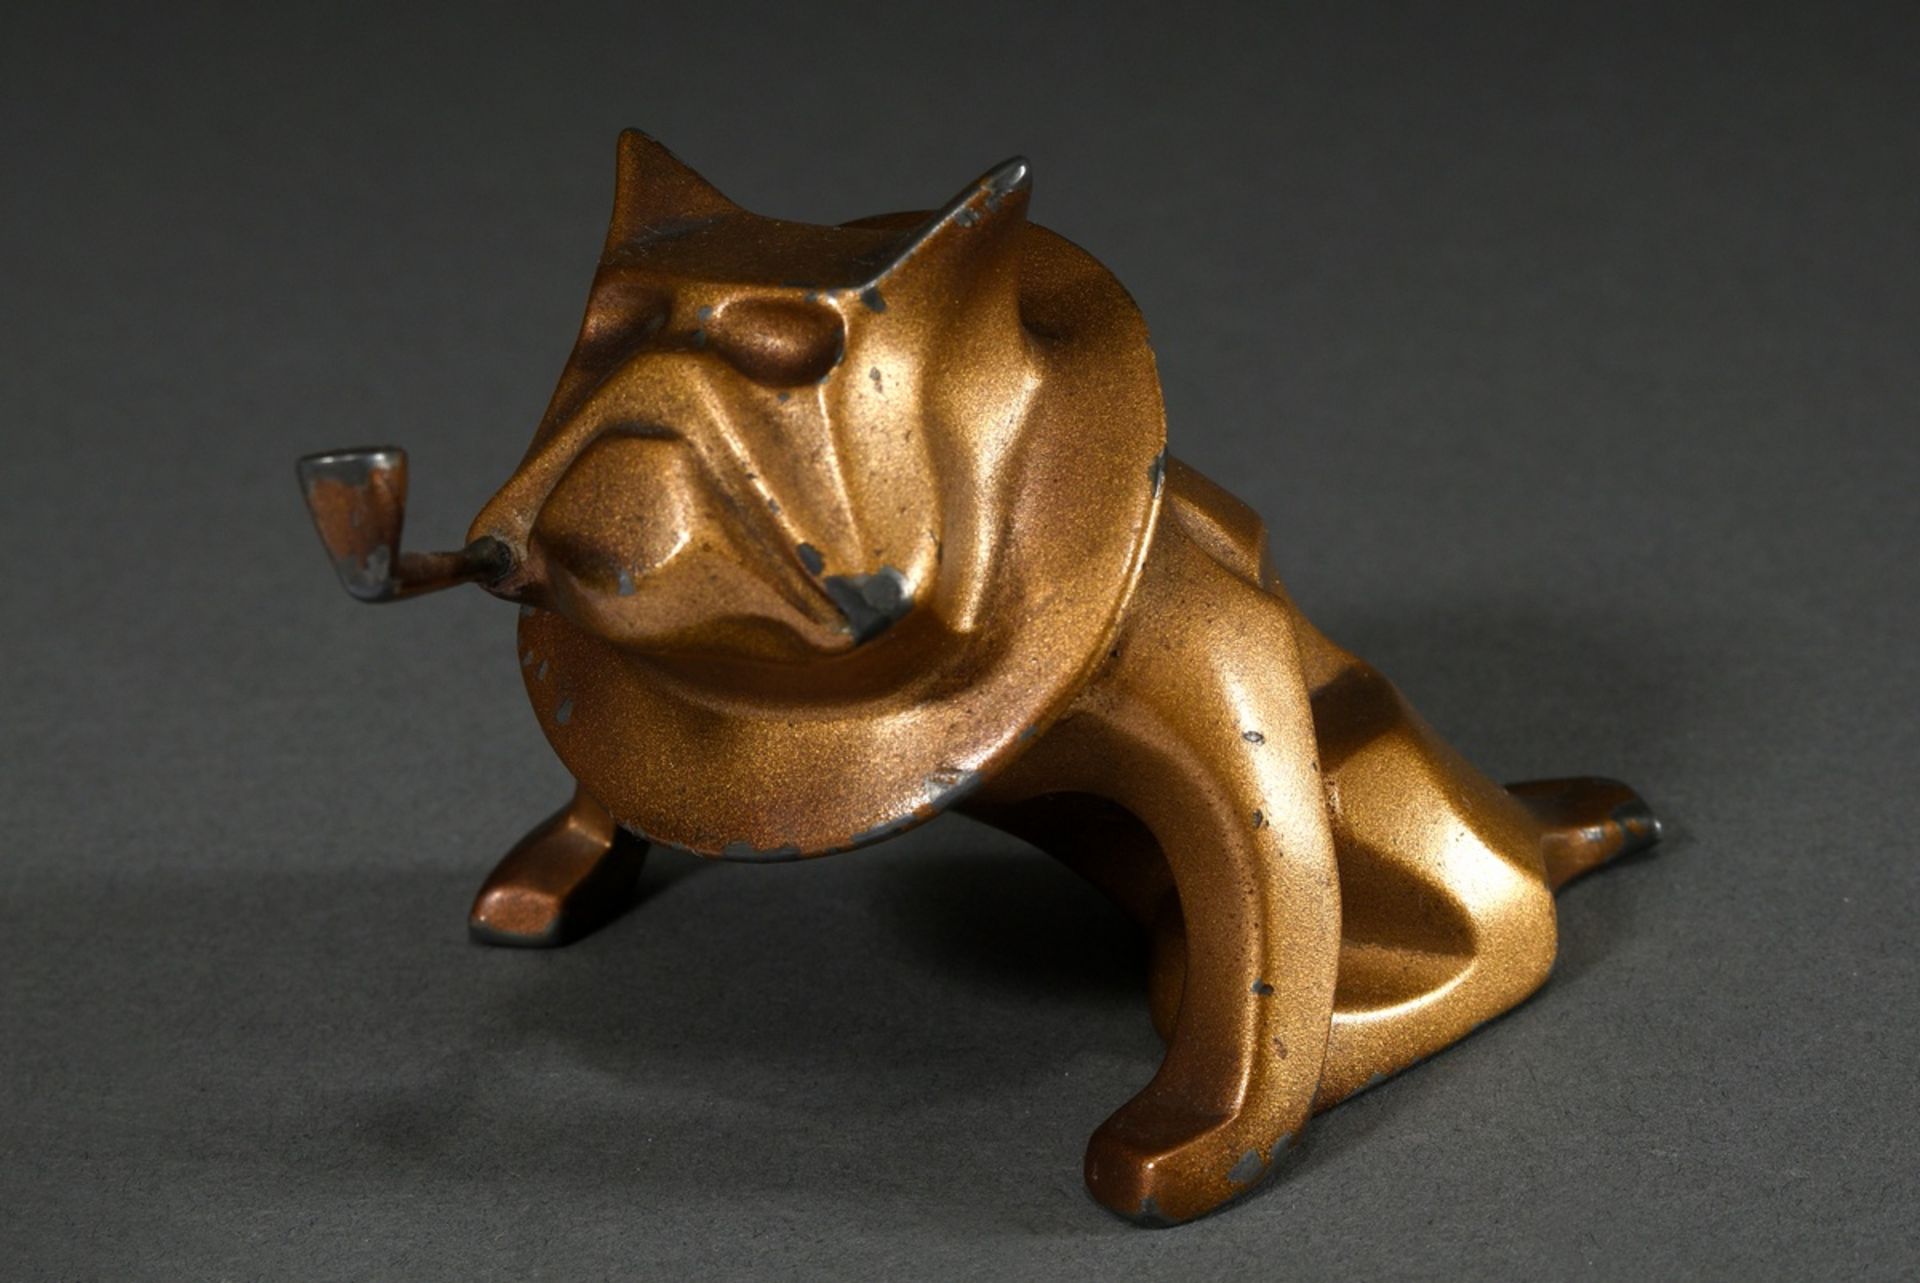 Sculpture "Bulldog with whistle", c. 1920, galvanised zinc casting, partially rubbed, 7.5x12x8.5cm,